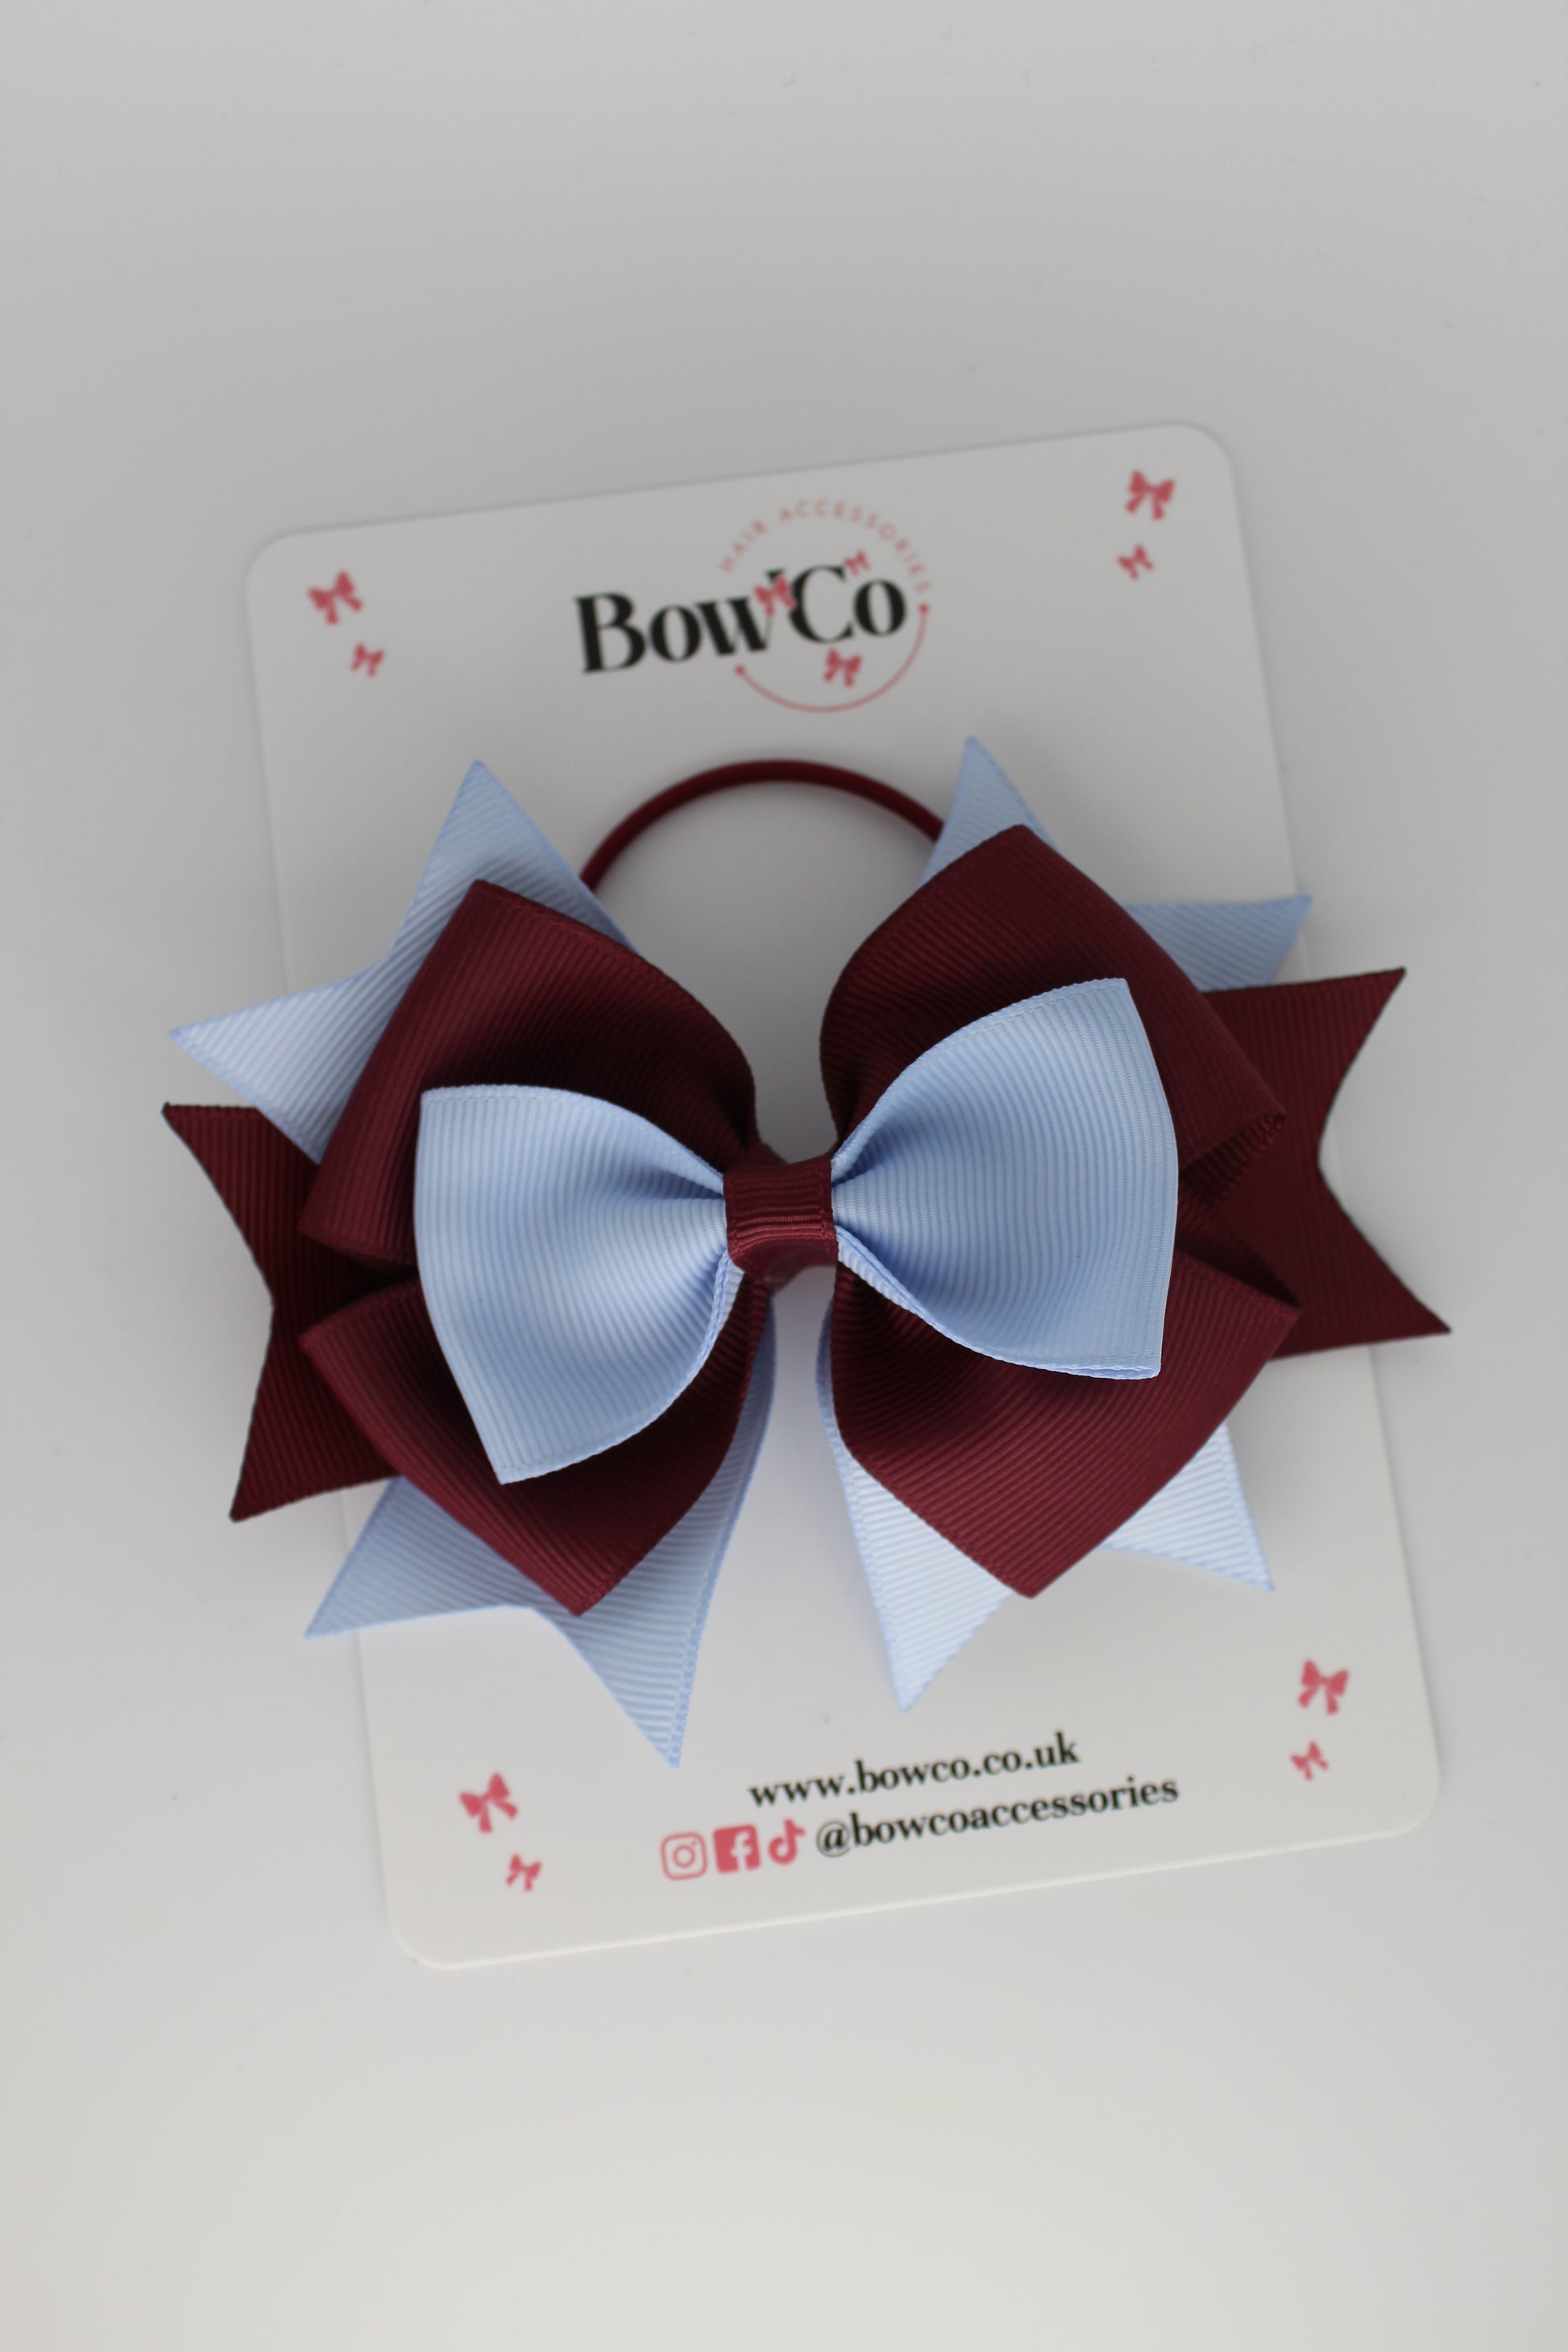 3.5 Inches Layer Bow - Elastic Bobble - Burgundy and Bluebell